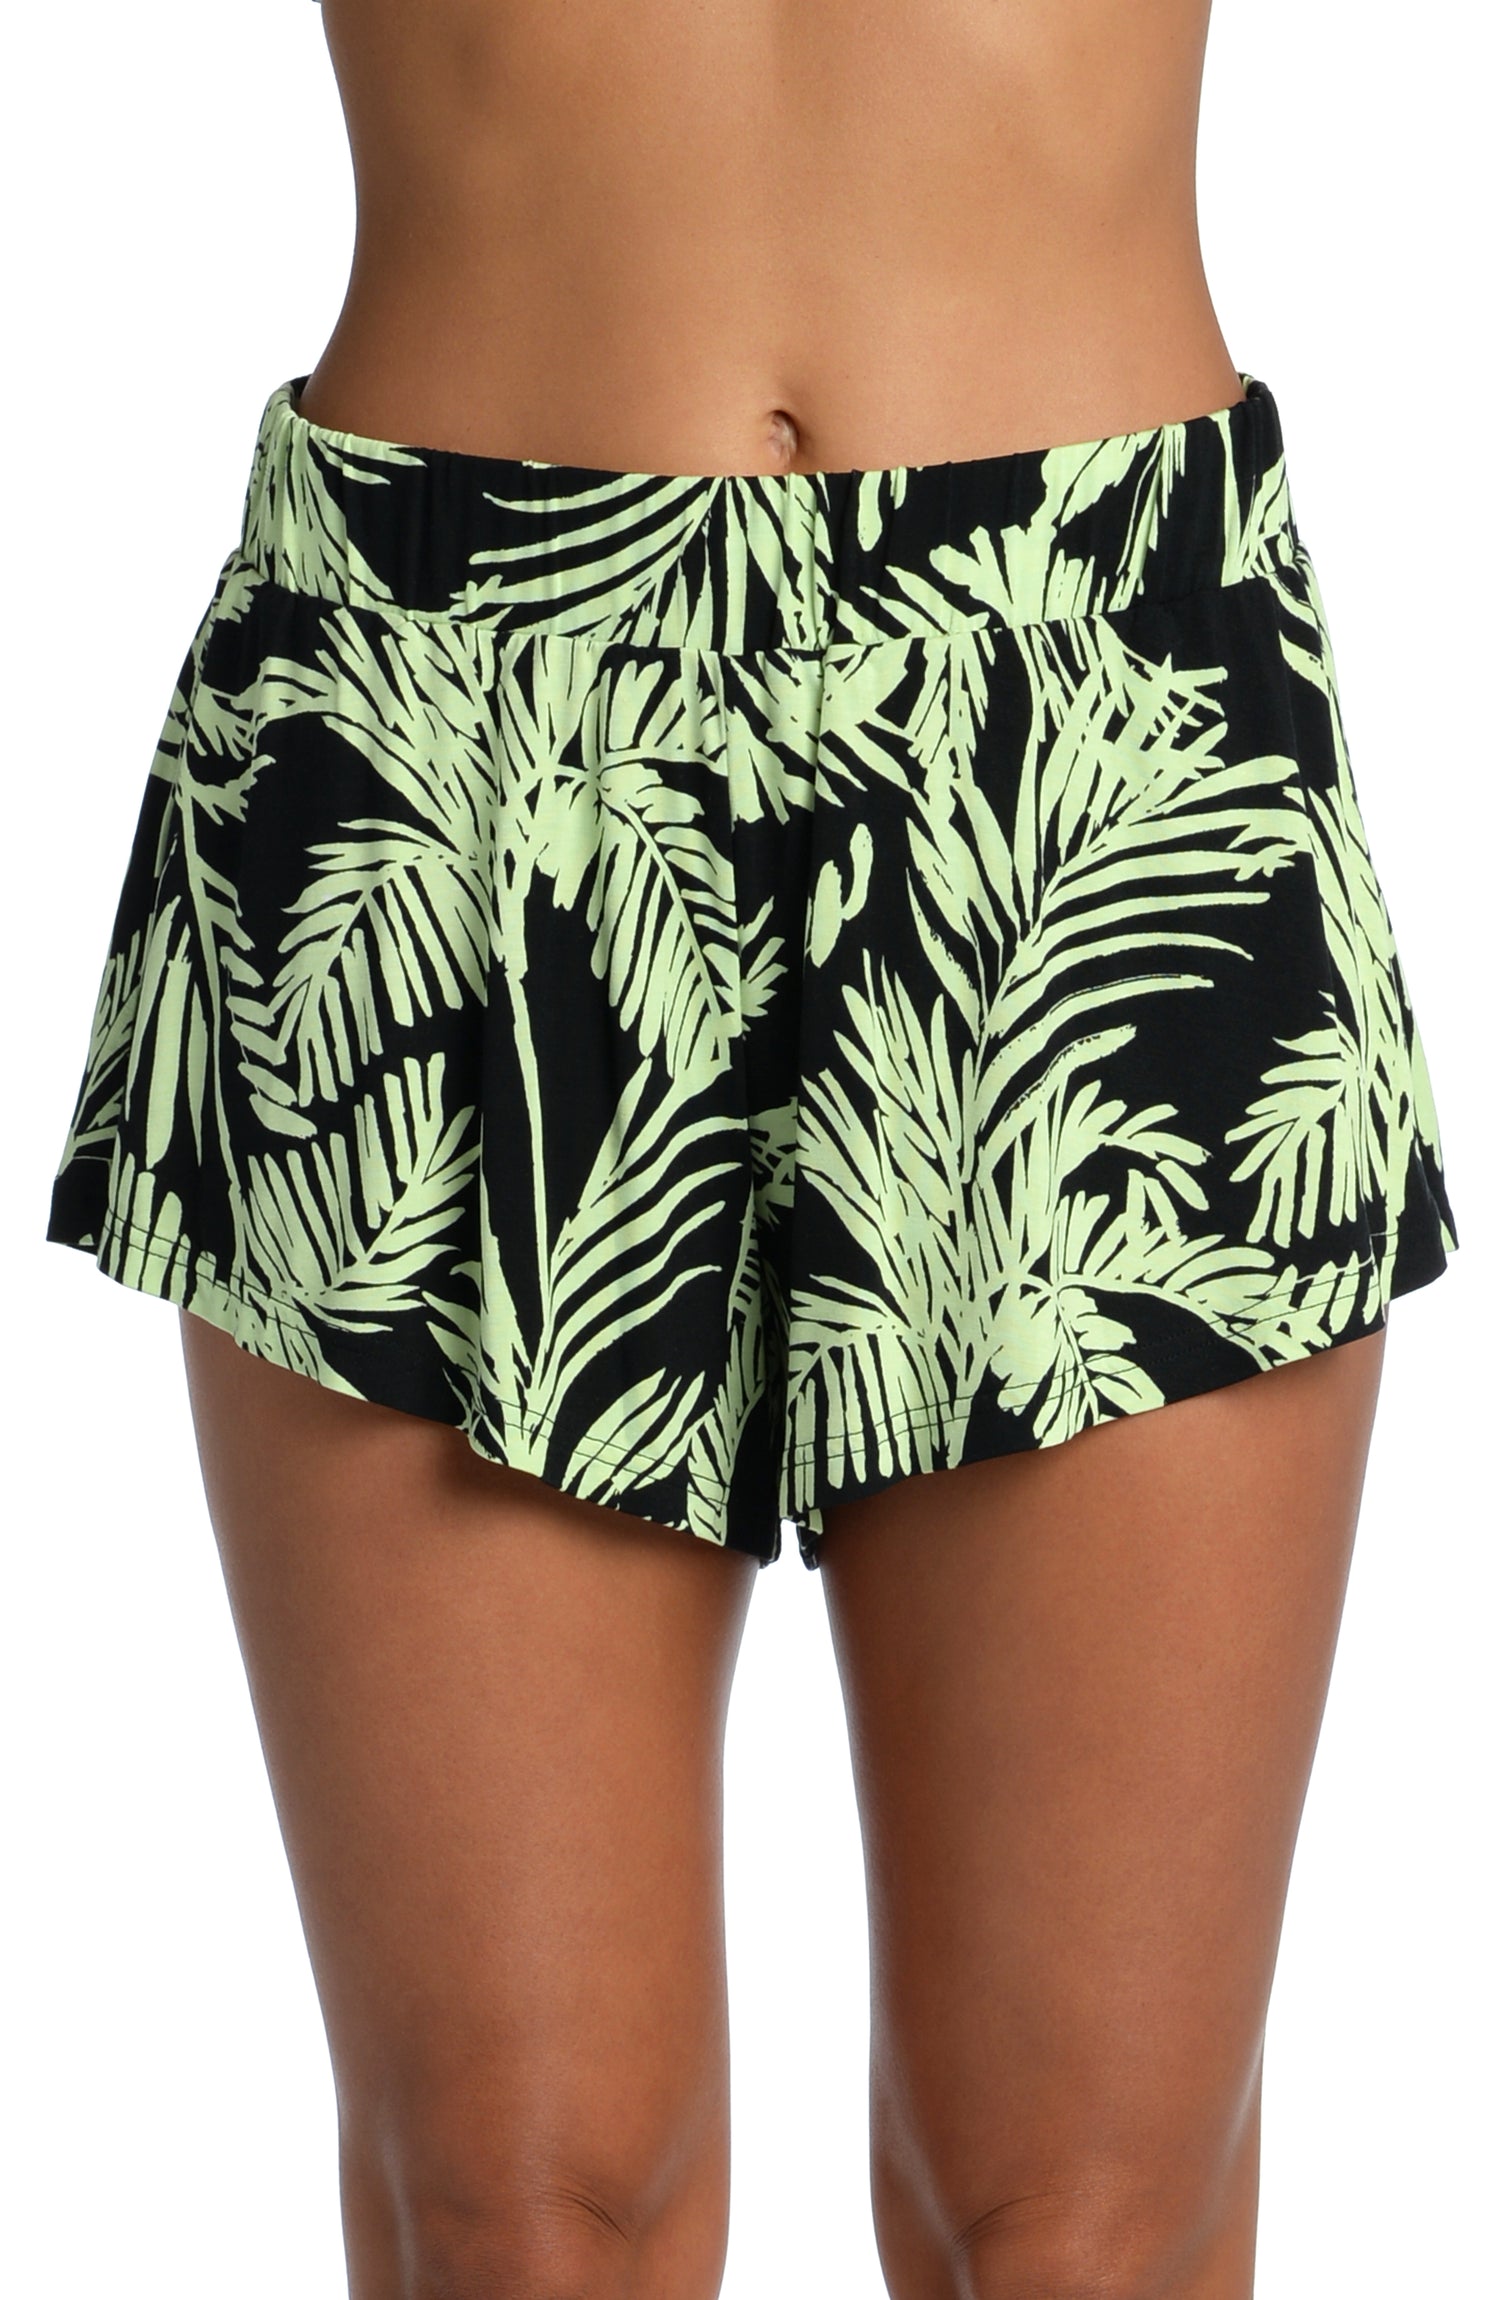 Model is wearing a green and black colored tropical printed flounce short from our Abstract Palm collection!